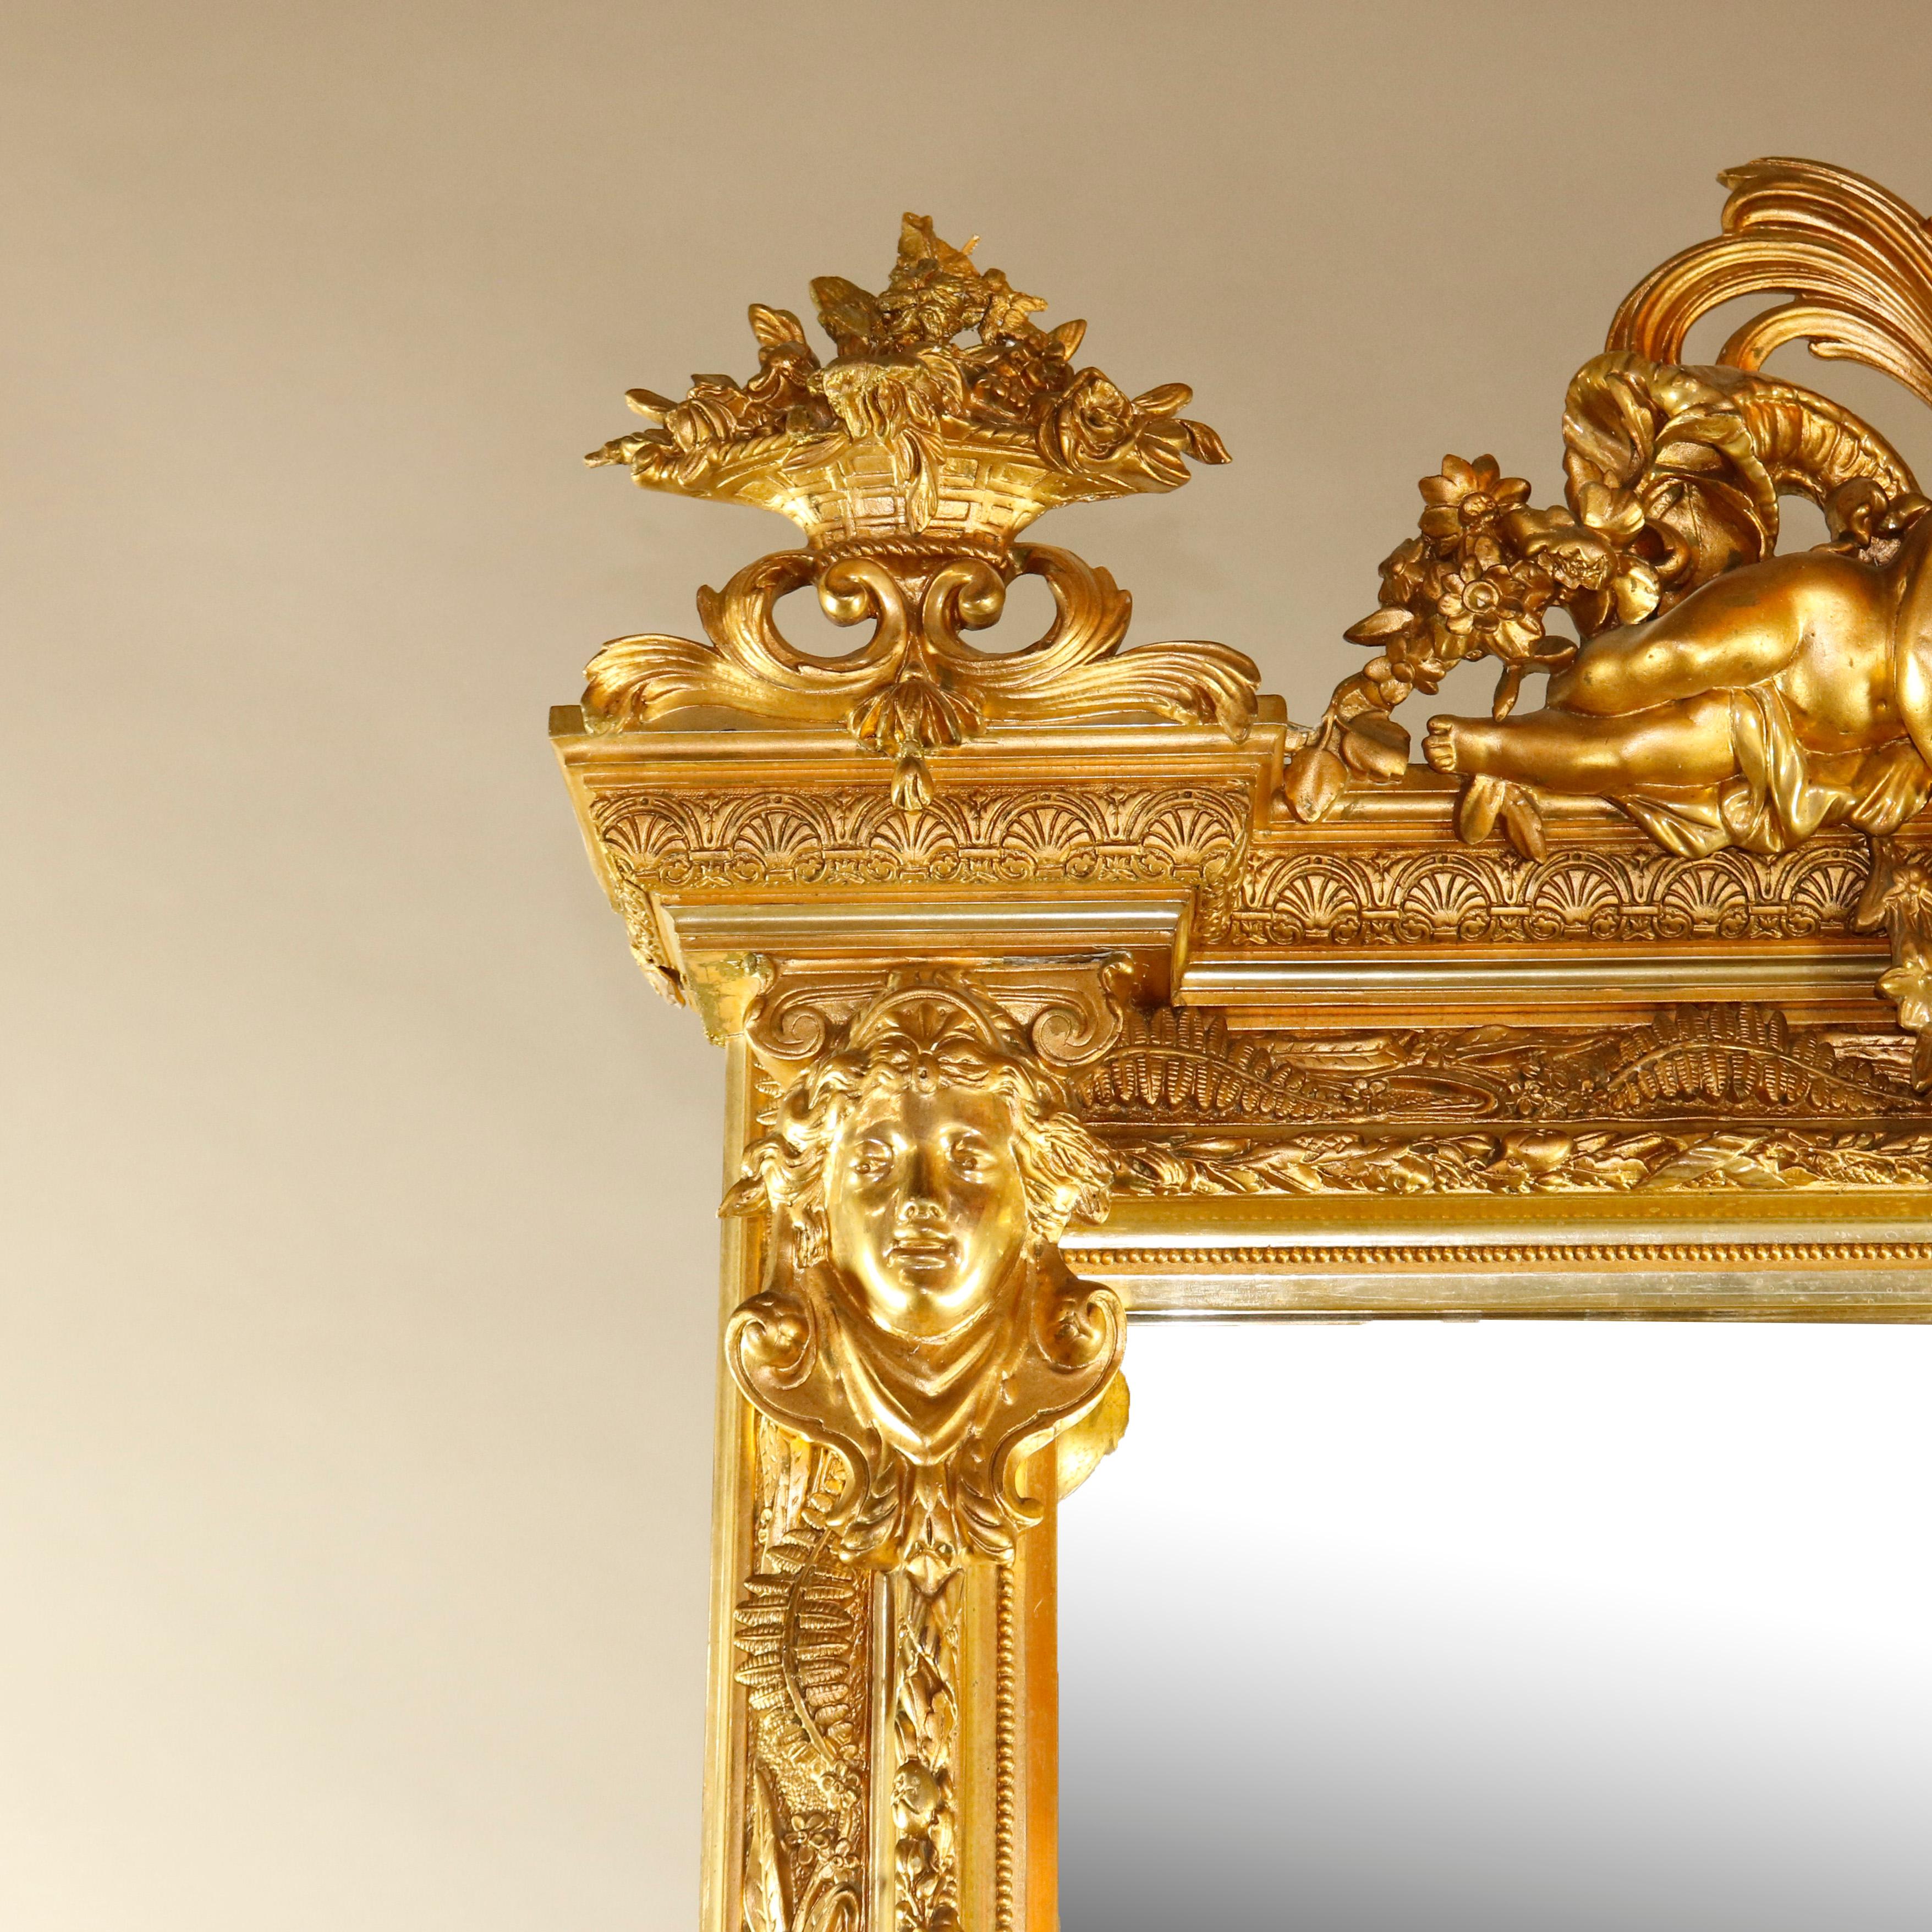 An antique French Baroque style figural pier mirror offers giltwood surround with pierced scroll and foliate crest having central classical female bust flanked by Cherubs and Panier de Fleurs surmounting fern and foliate decorated frame with